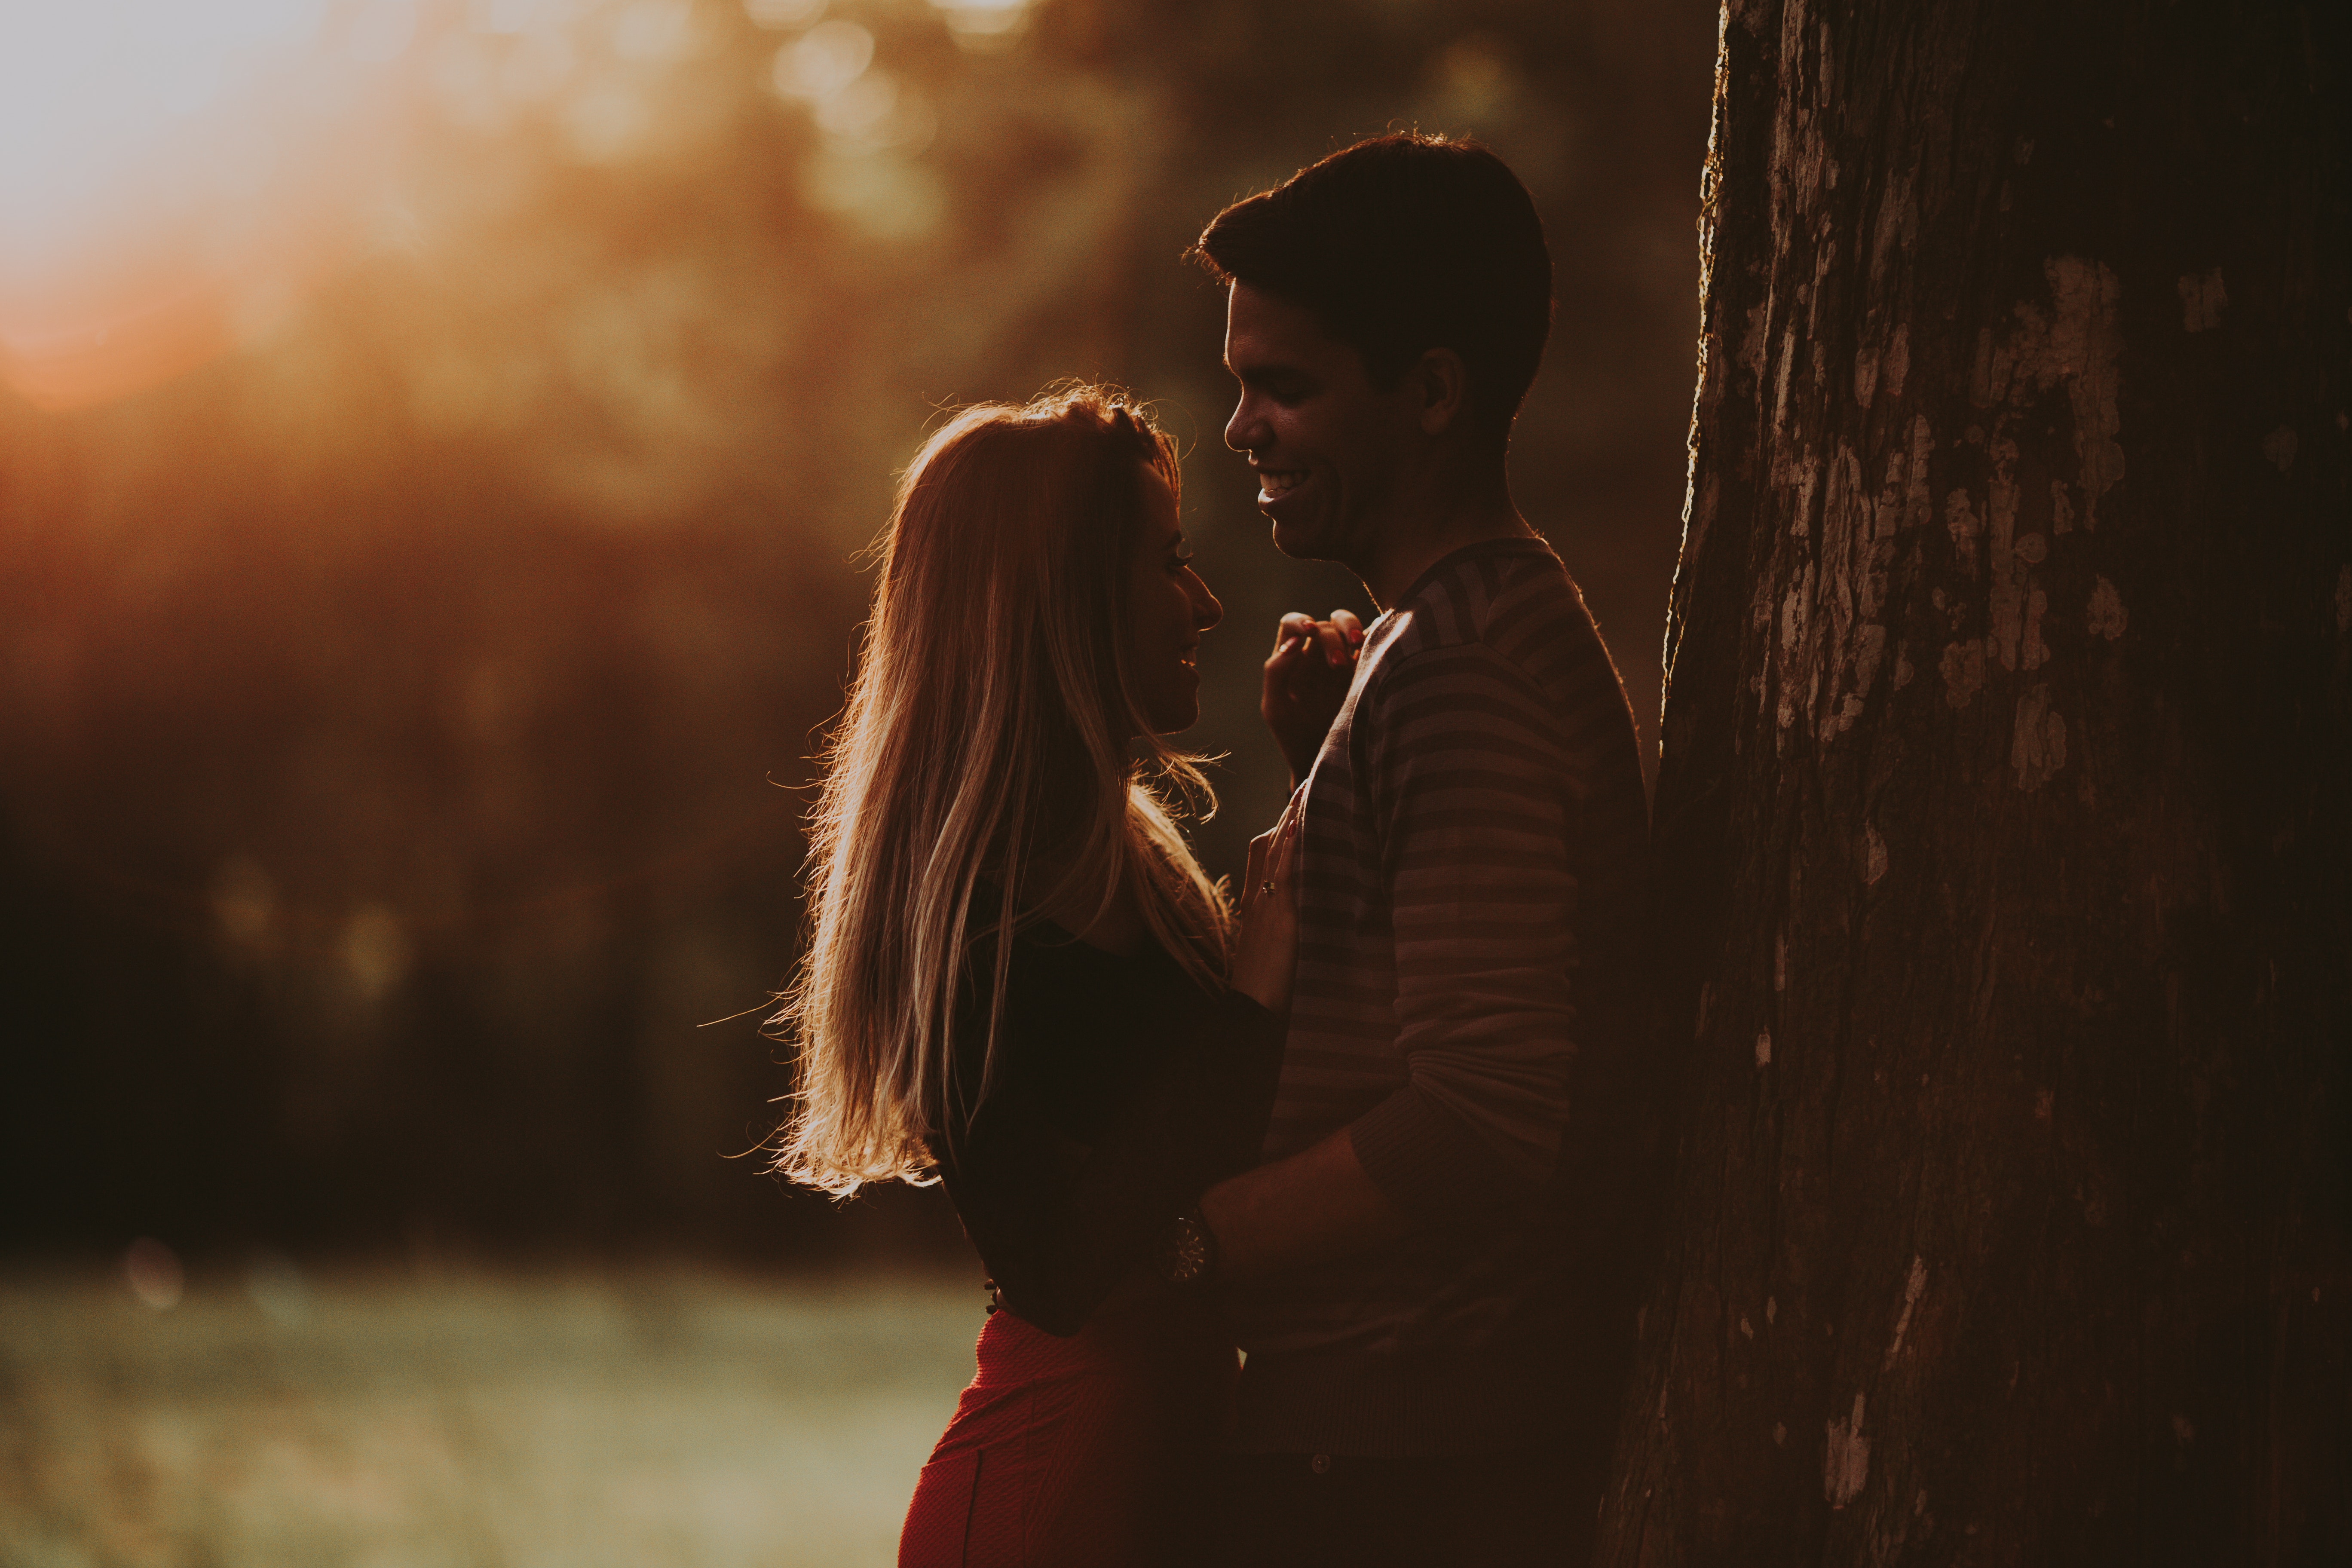 Silhouette of a Couple Standing Close and Smiling at Sunset. | Source: Pexels